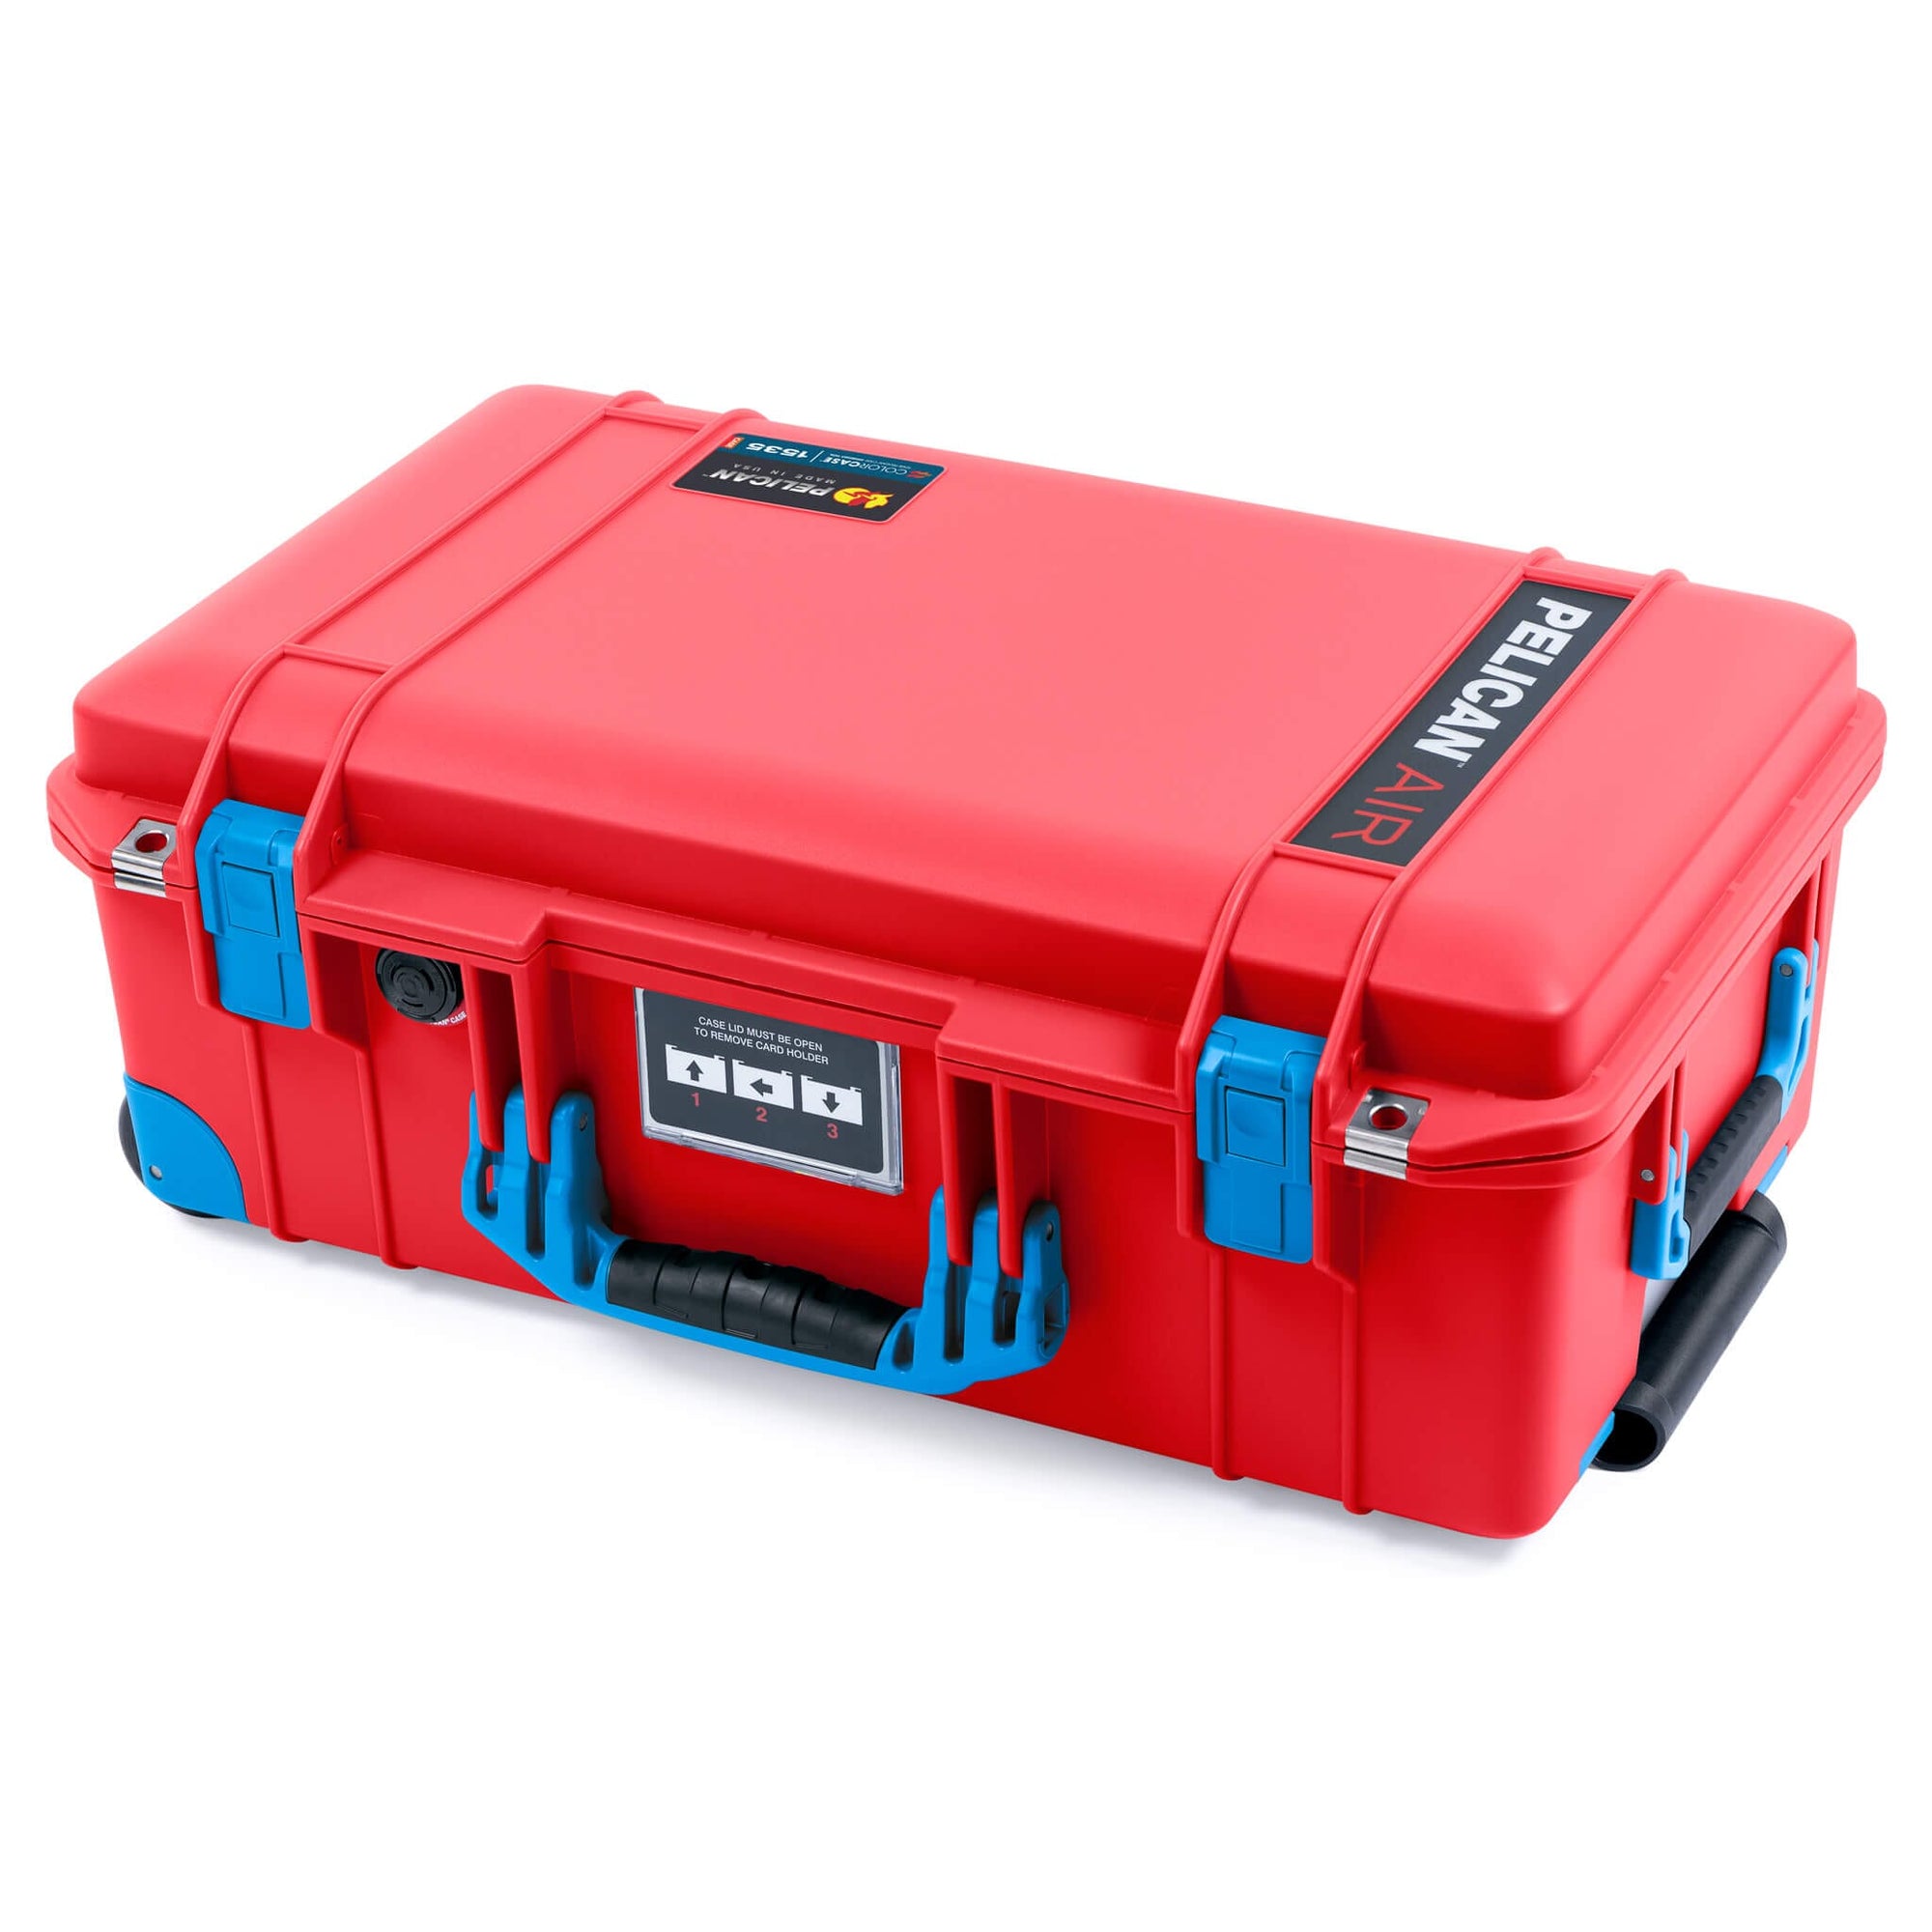 Pelican 1535 Air Case, Red with Blue Handles, Push-Button Latches & Trolley ColorCase 